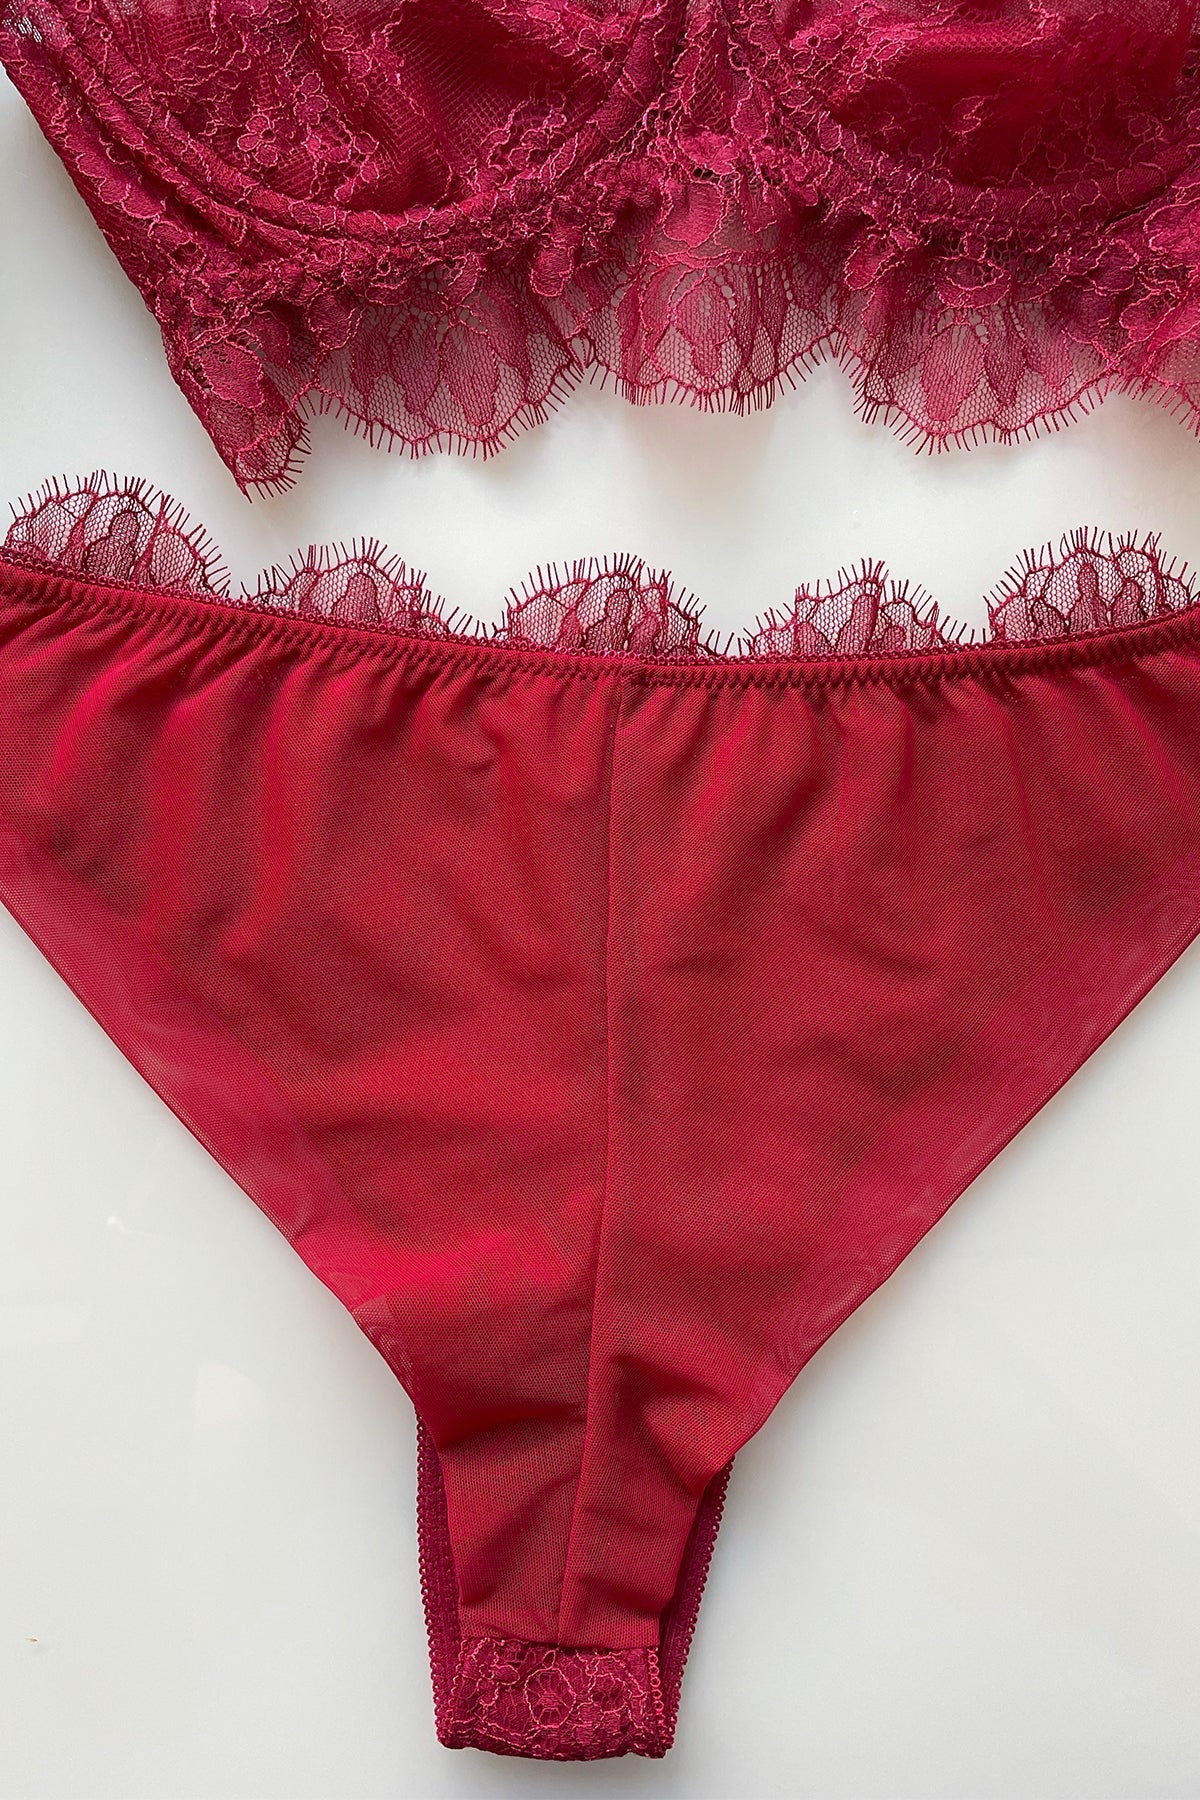 Lingerie set of lace Underwire Bra and Thong Bottom, Burgundy - Lida